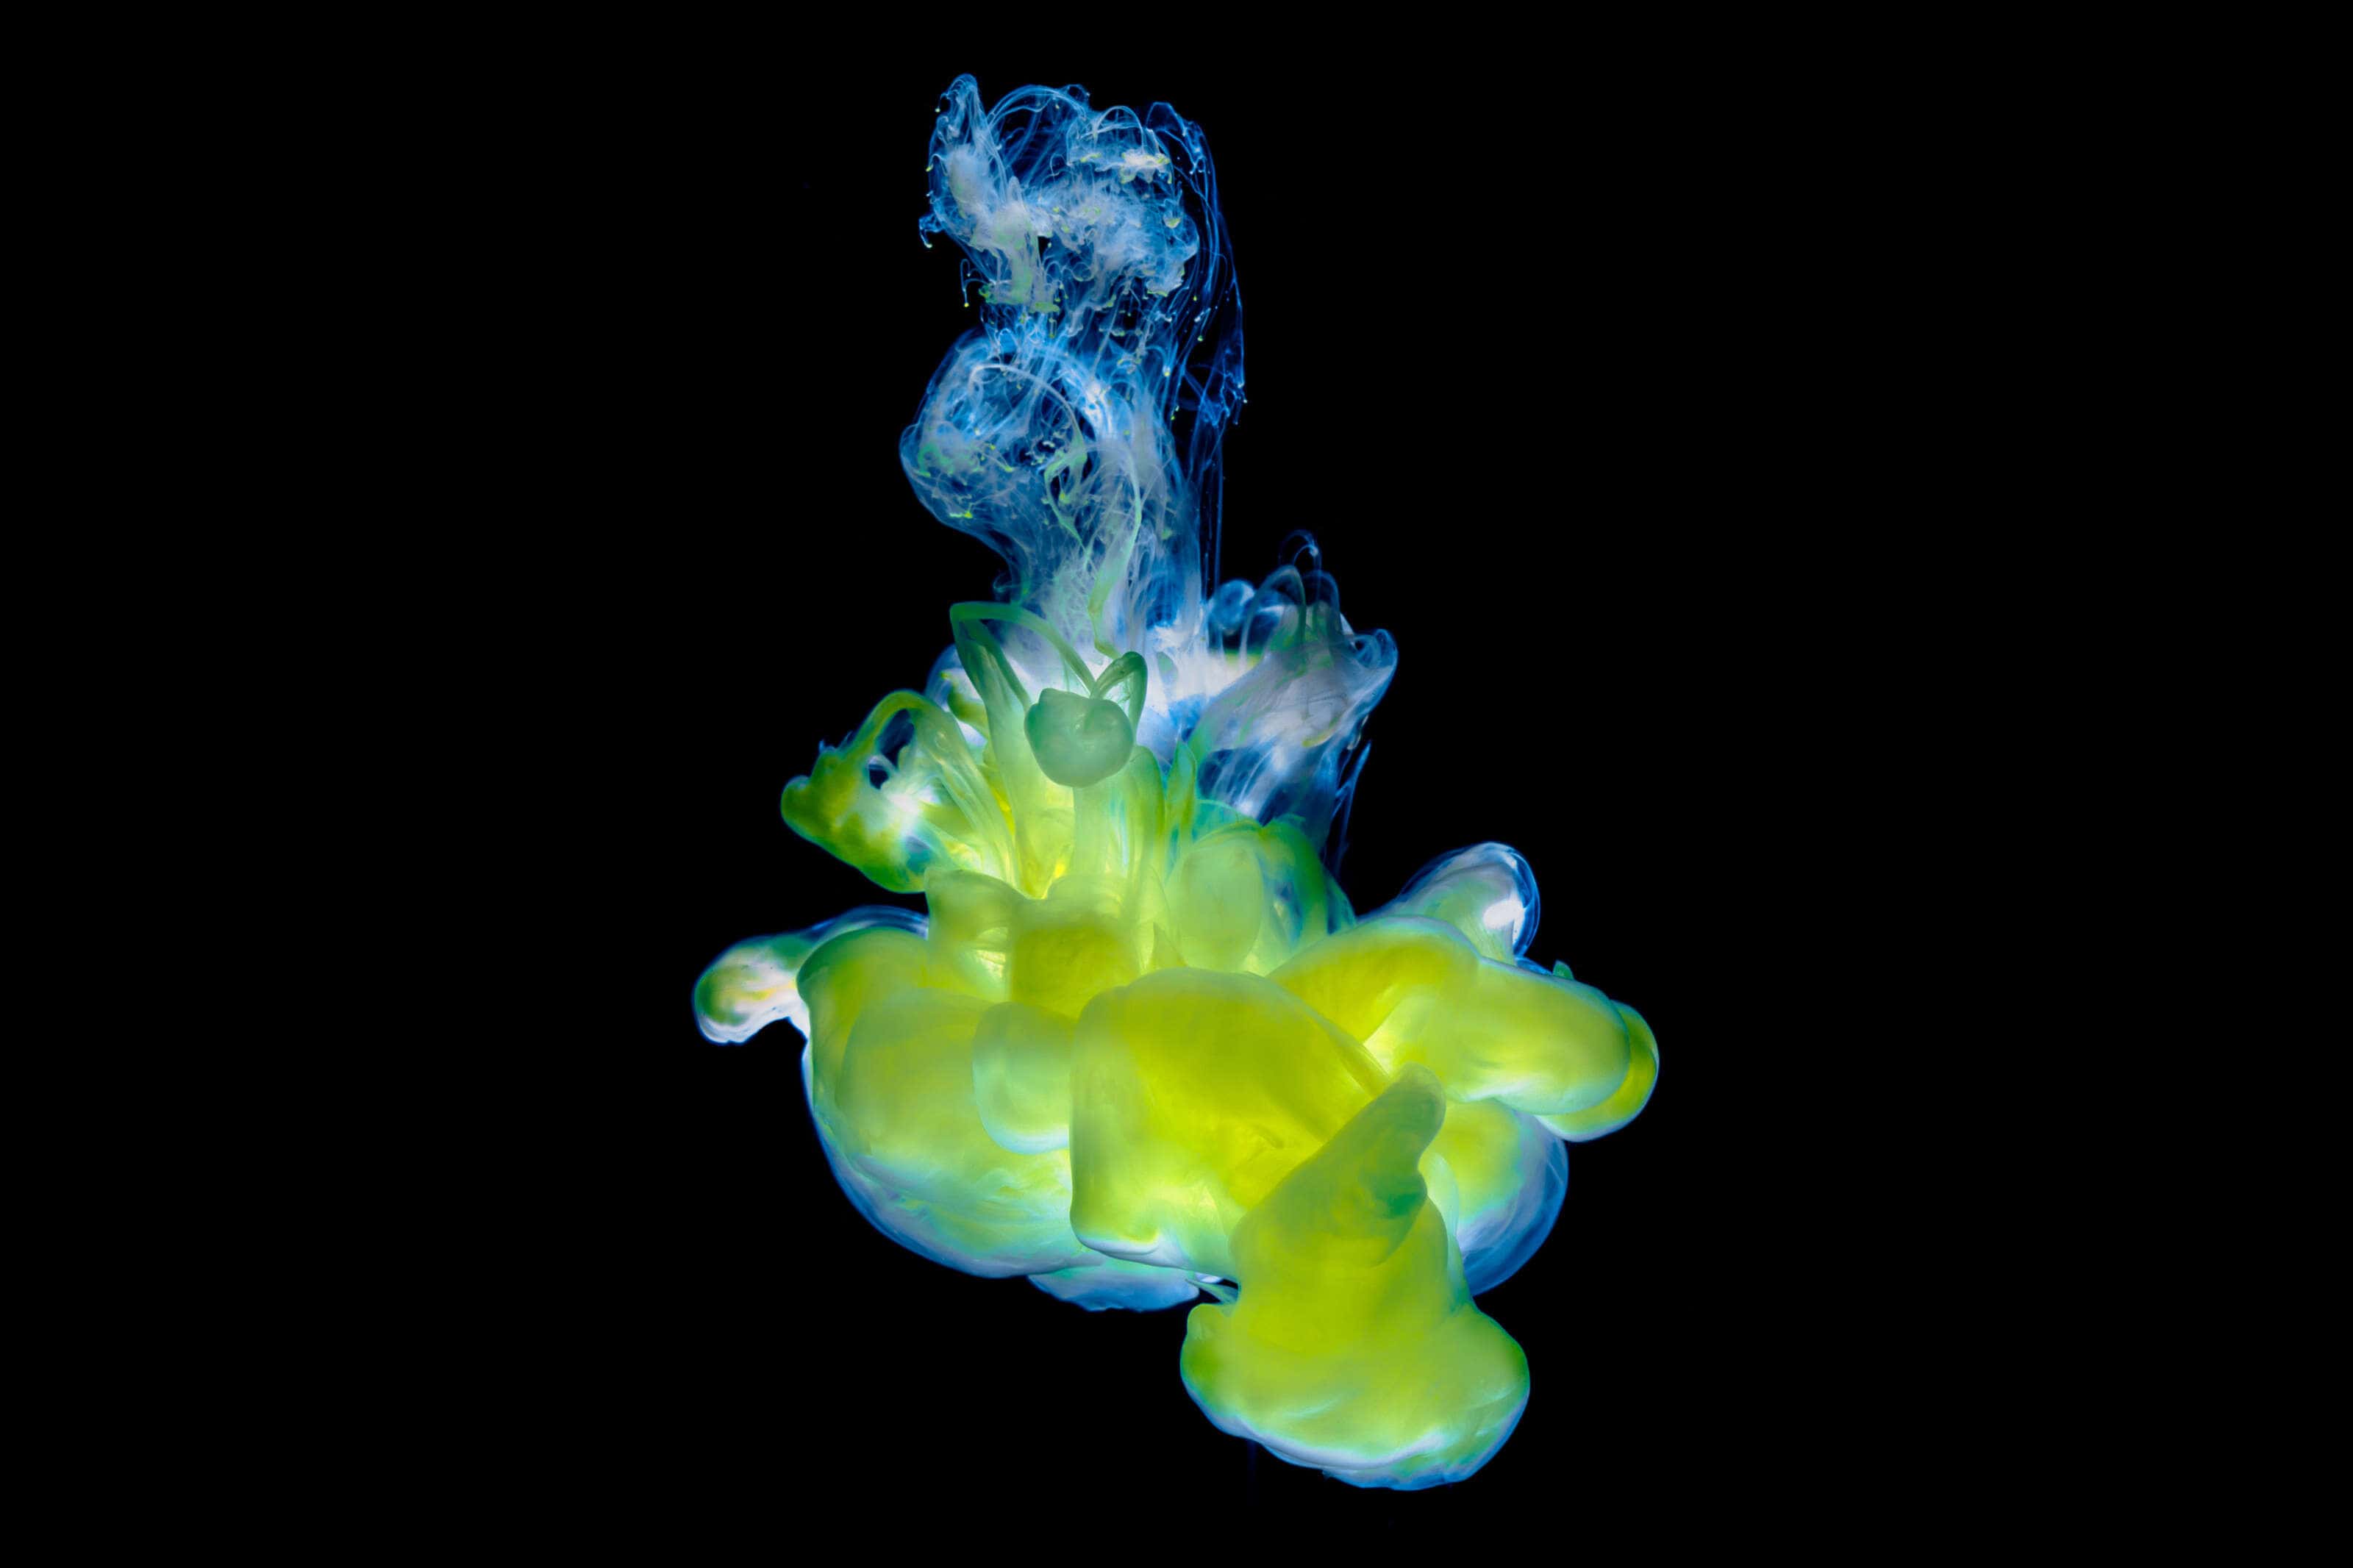 yellow liquid forming a cloud in water